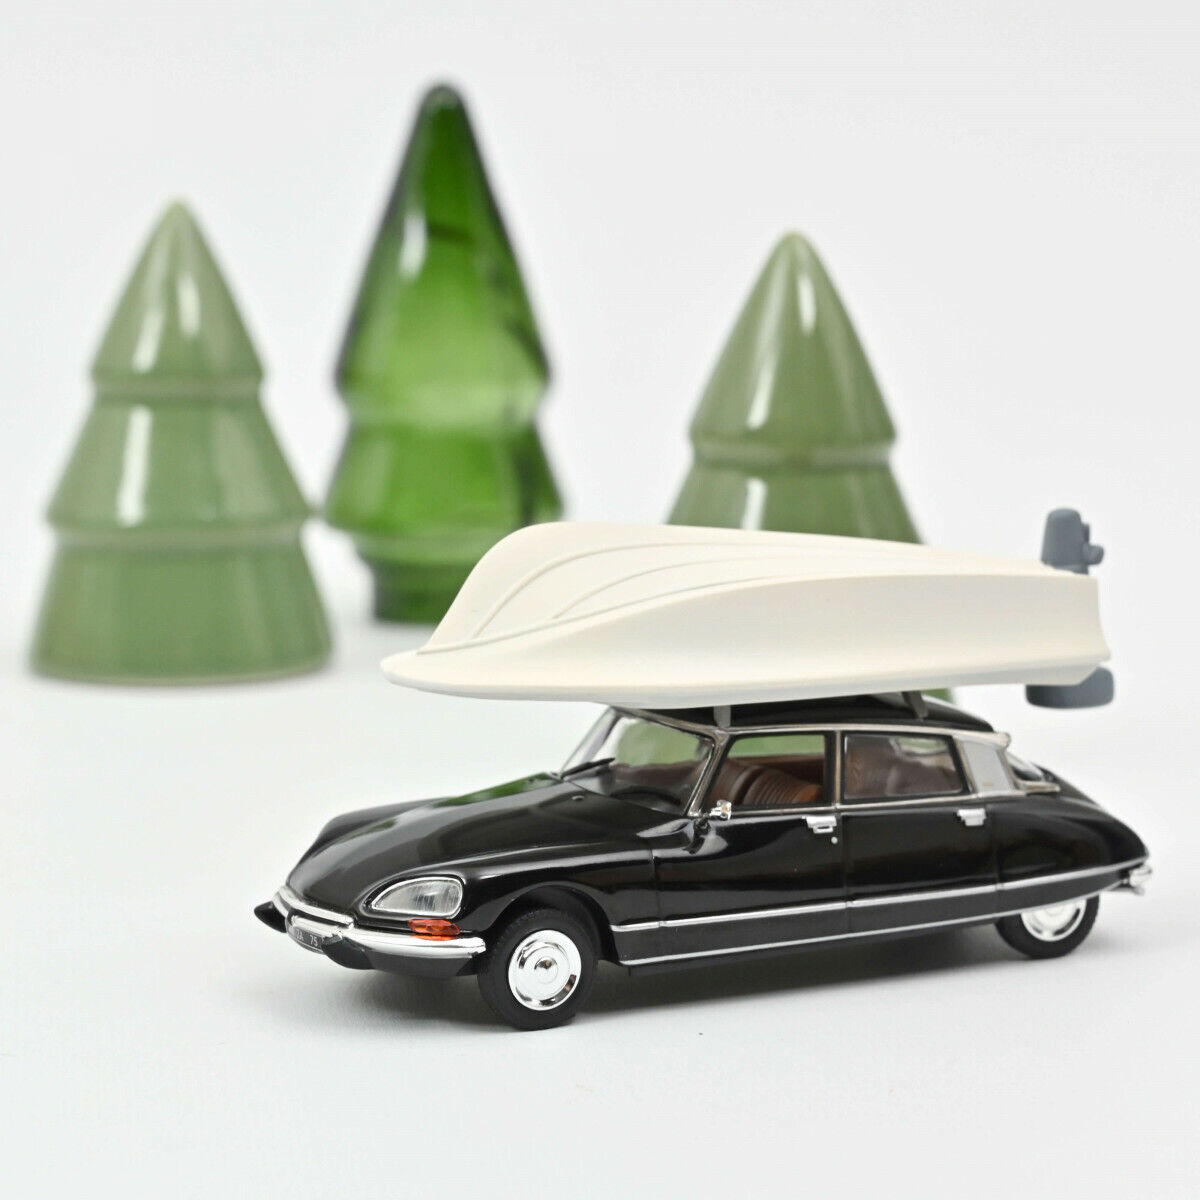 Norev Citroën DS 21 Pallas 1972 Black with Boat on Roof 1:43 157072